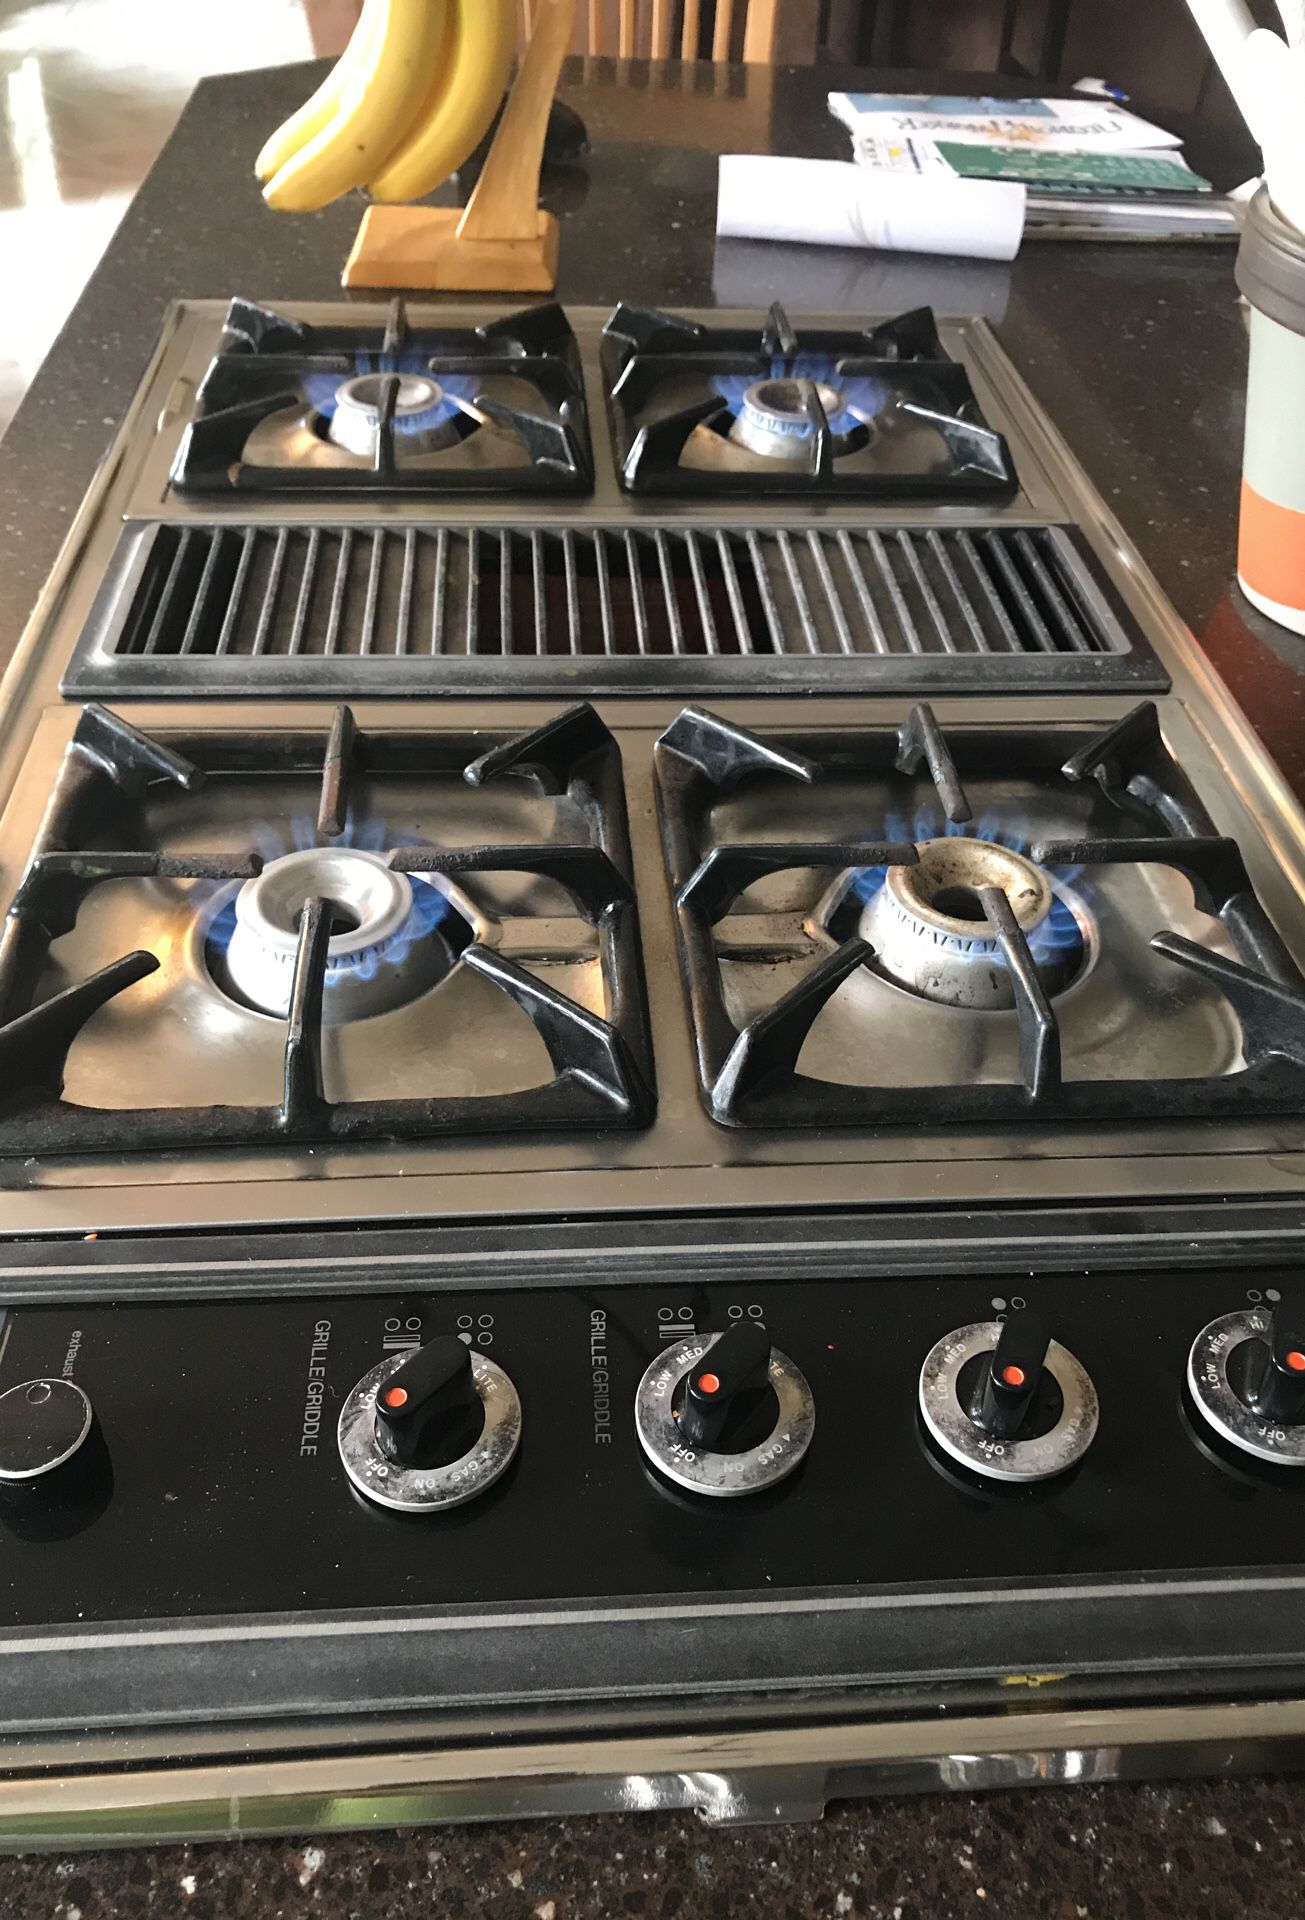 Modern Maid 36” downdraft gas cooktop used